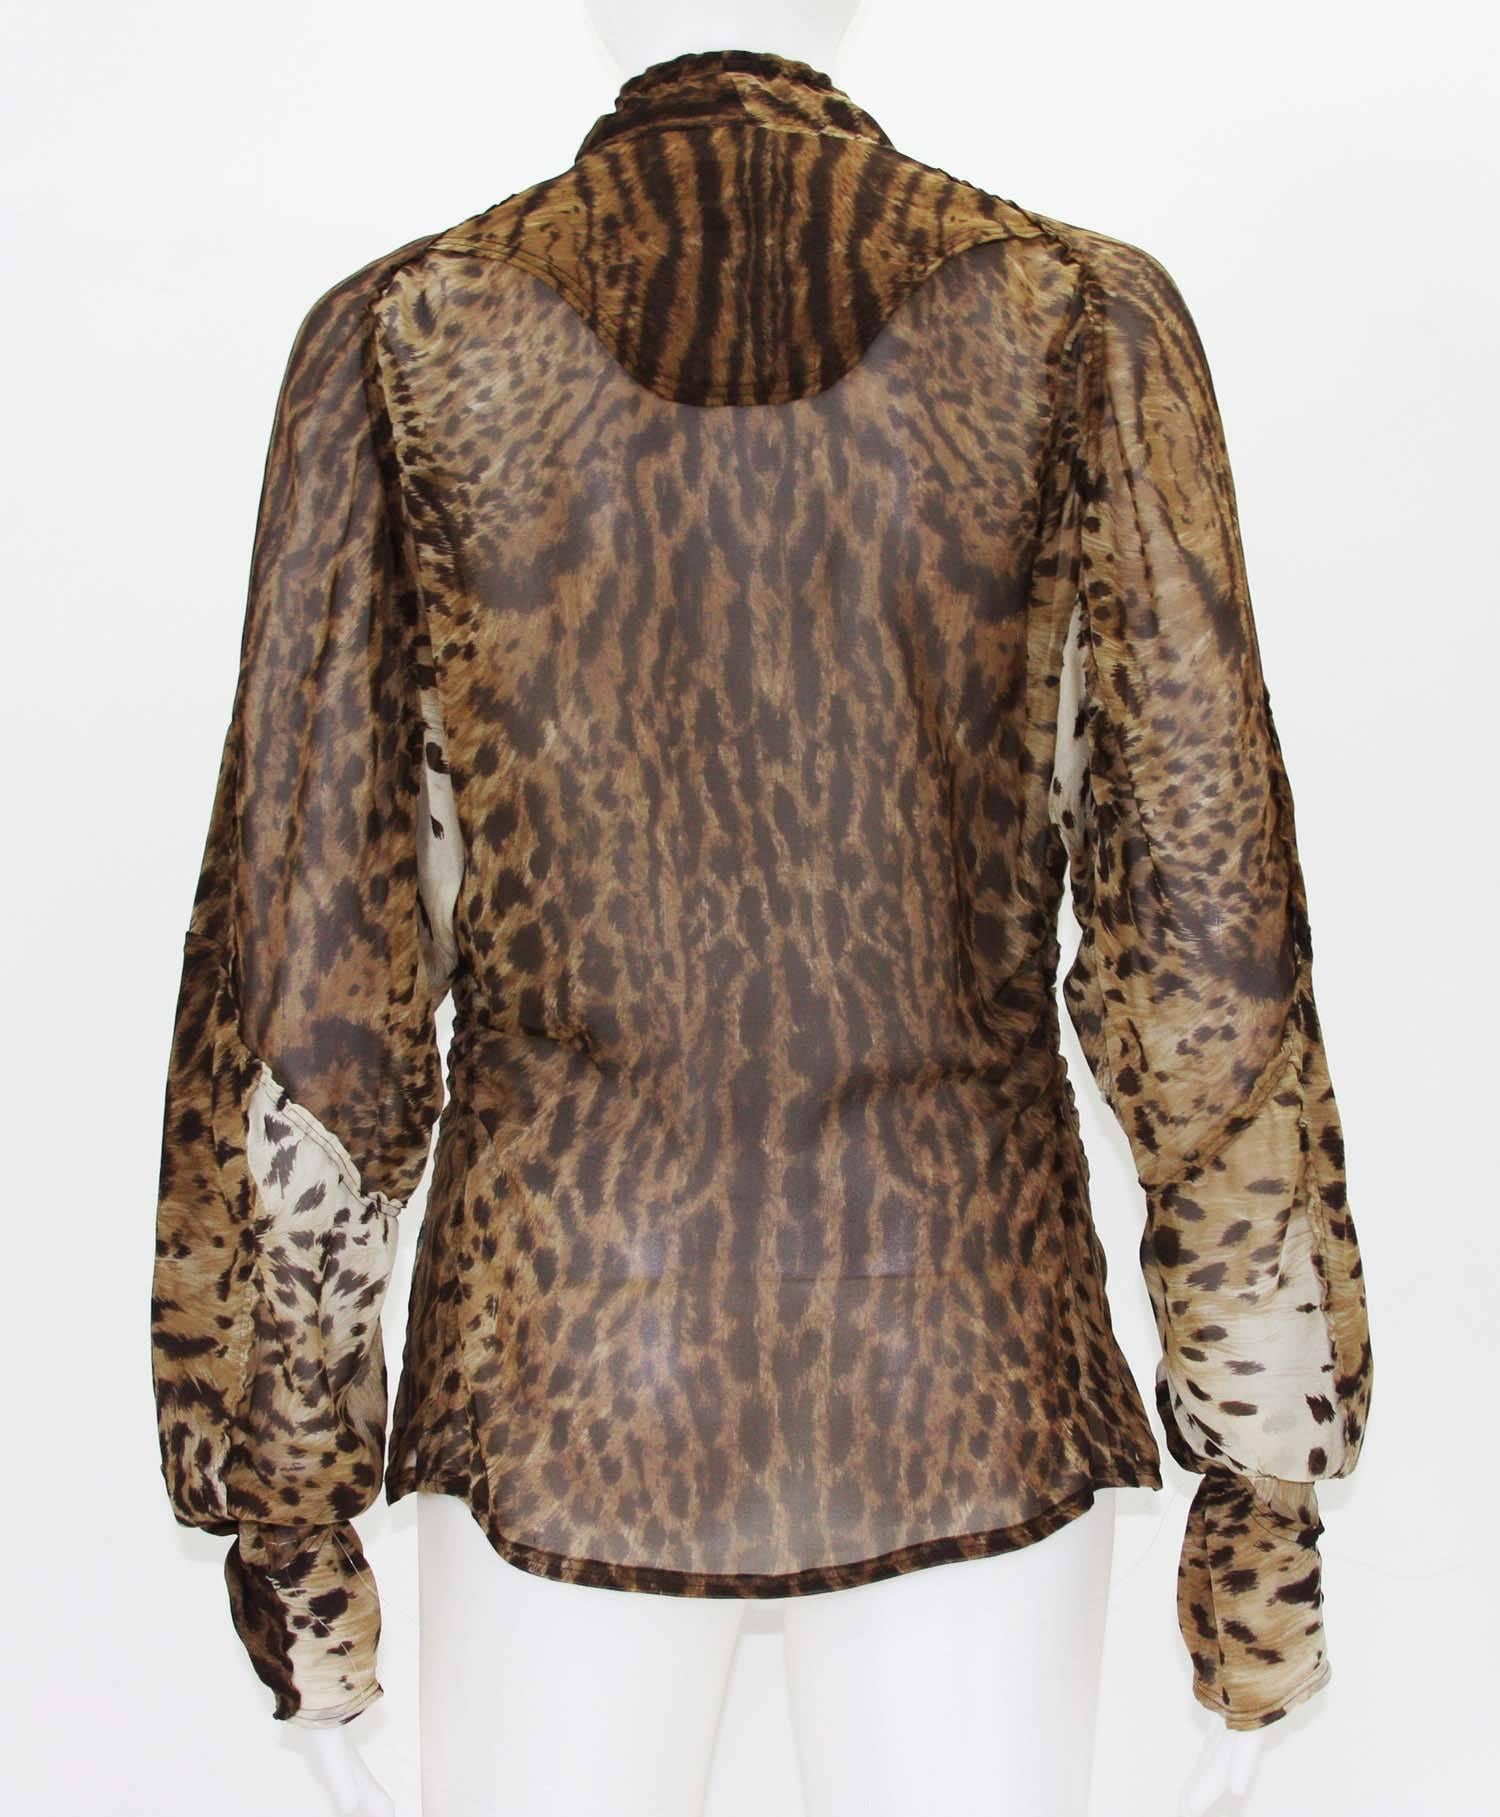 Women's Tom Ford for Yves Saint Laurent S/S 2002 Safari Collection Leopard Silk Top F 38 For Sale